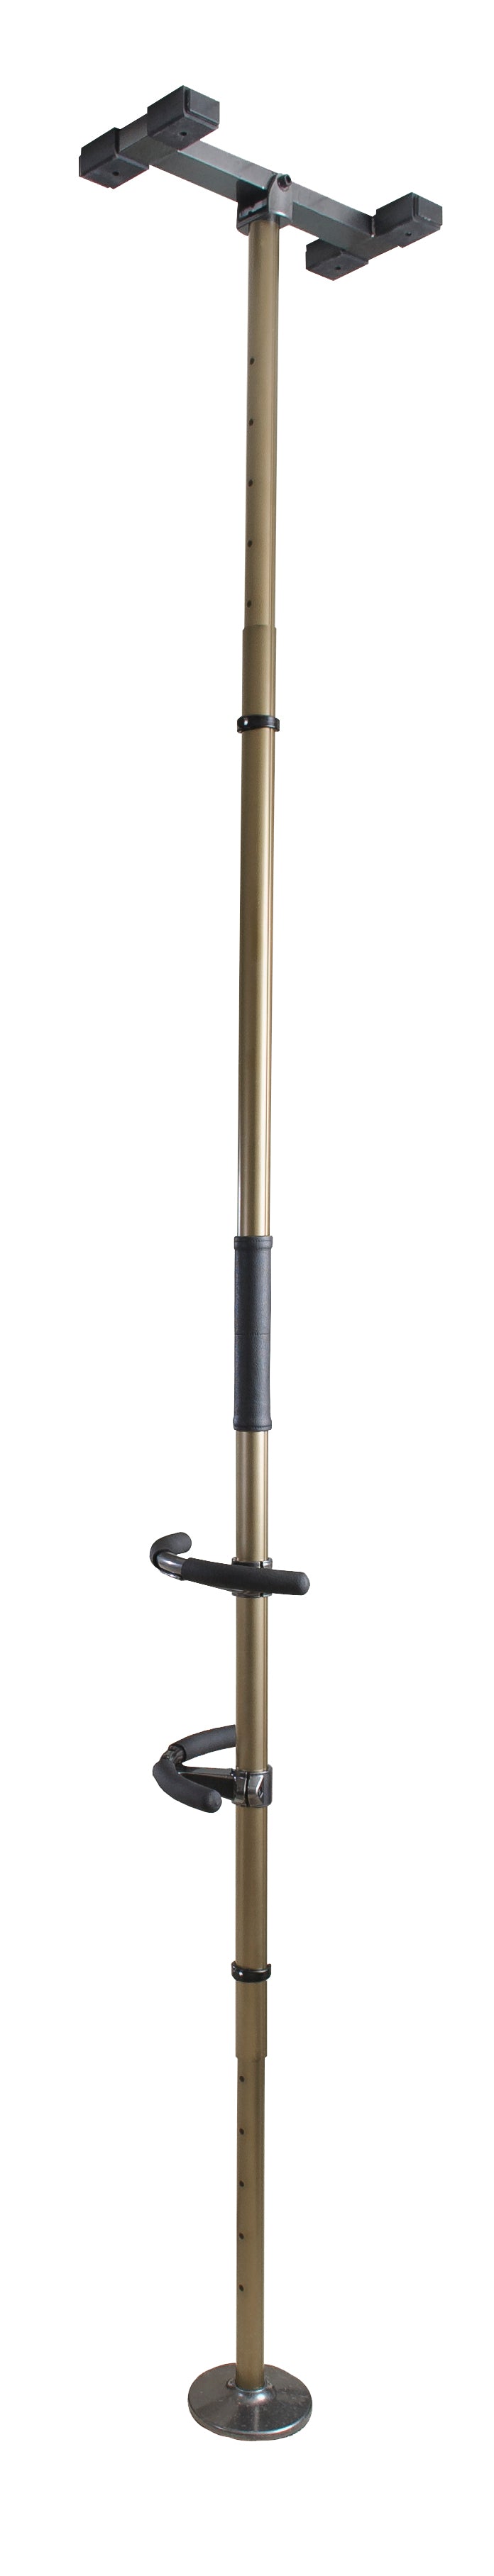 Sure Stand Security Pole (Bronze)